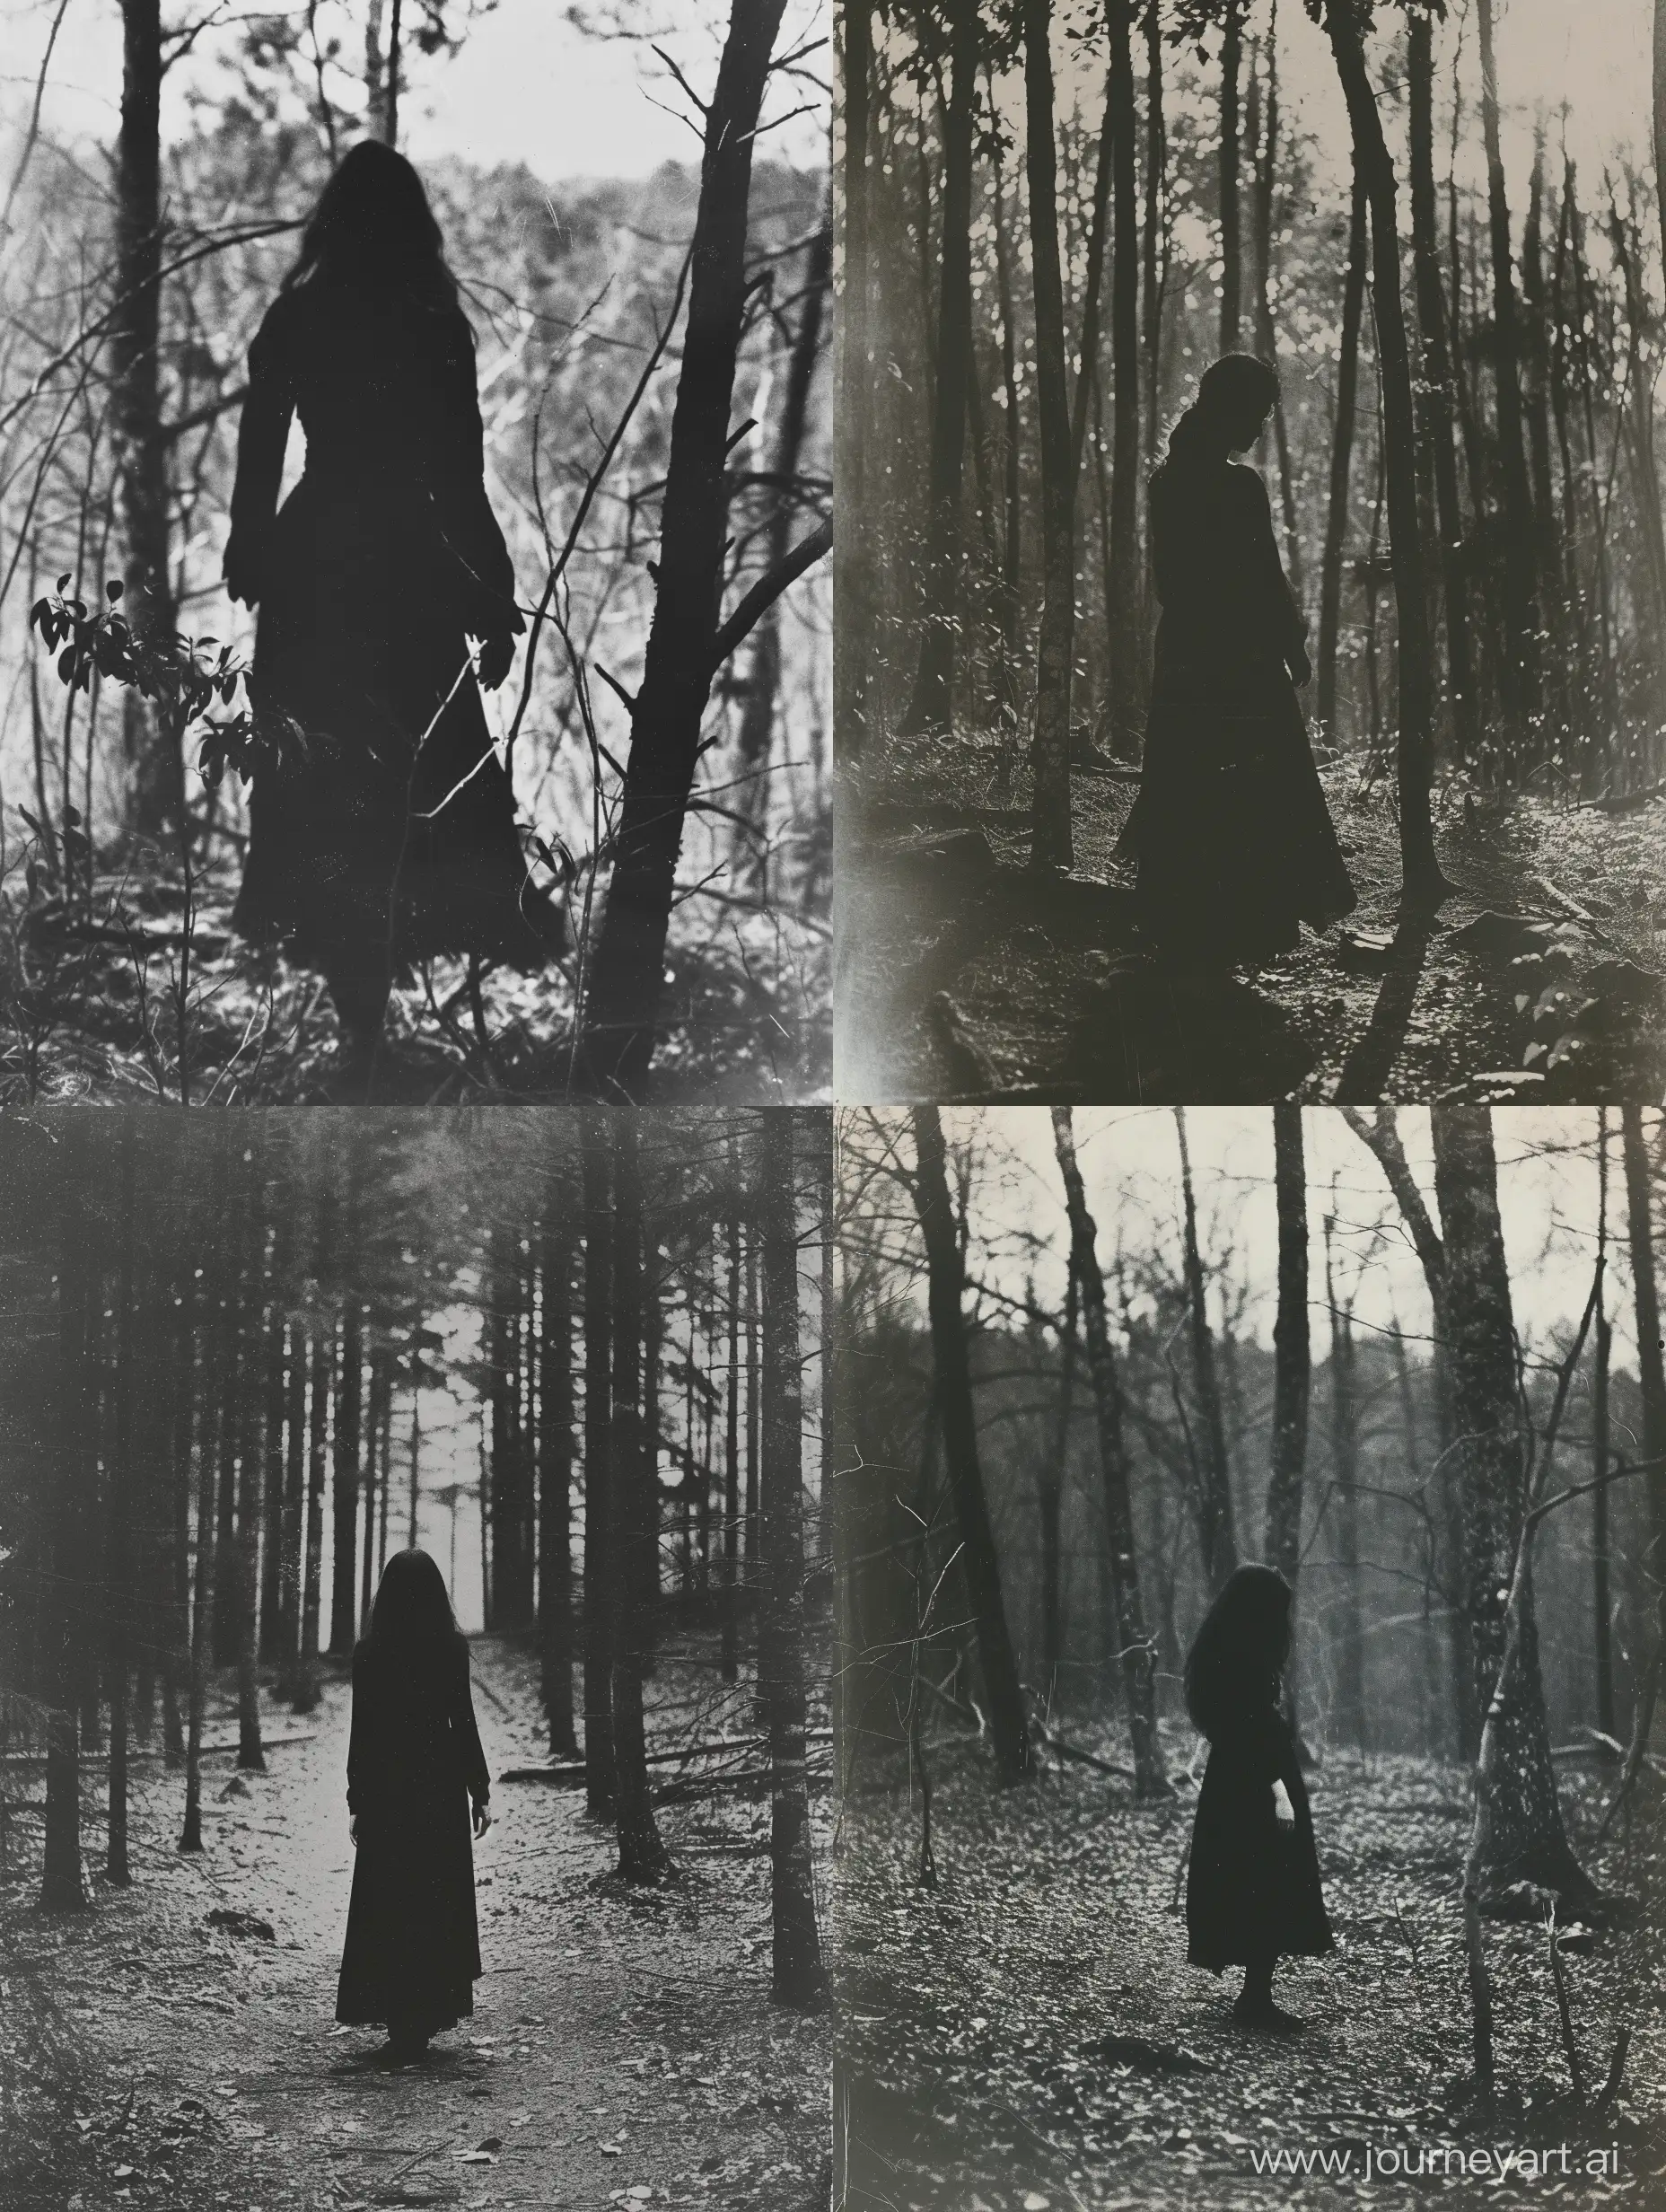 Demonic enigma woman, minimalistic forest, grayscale, horror core occult core, expired 35mm film, by David Octavius hill